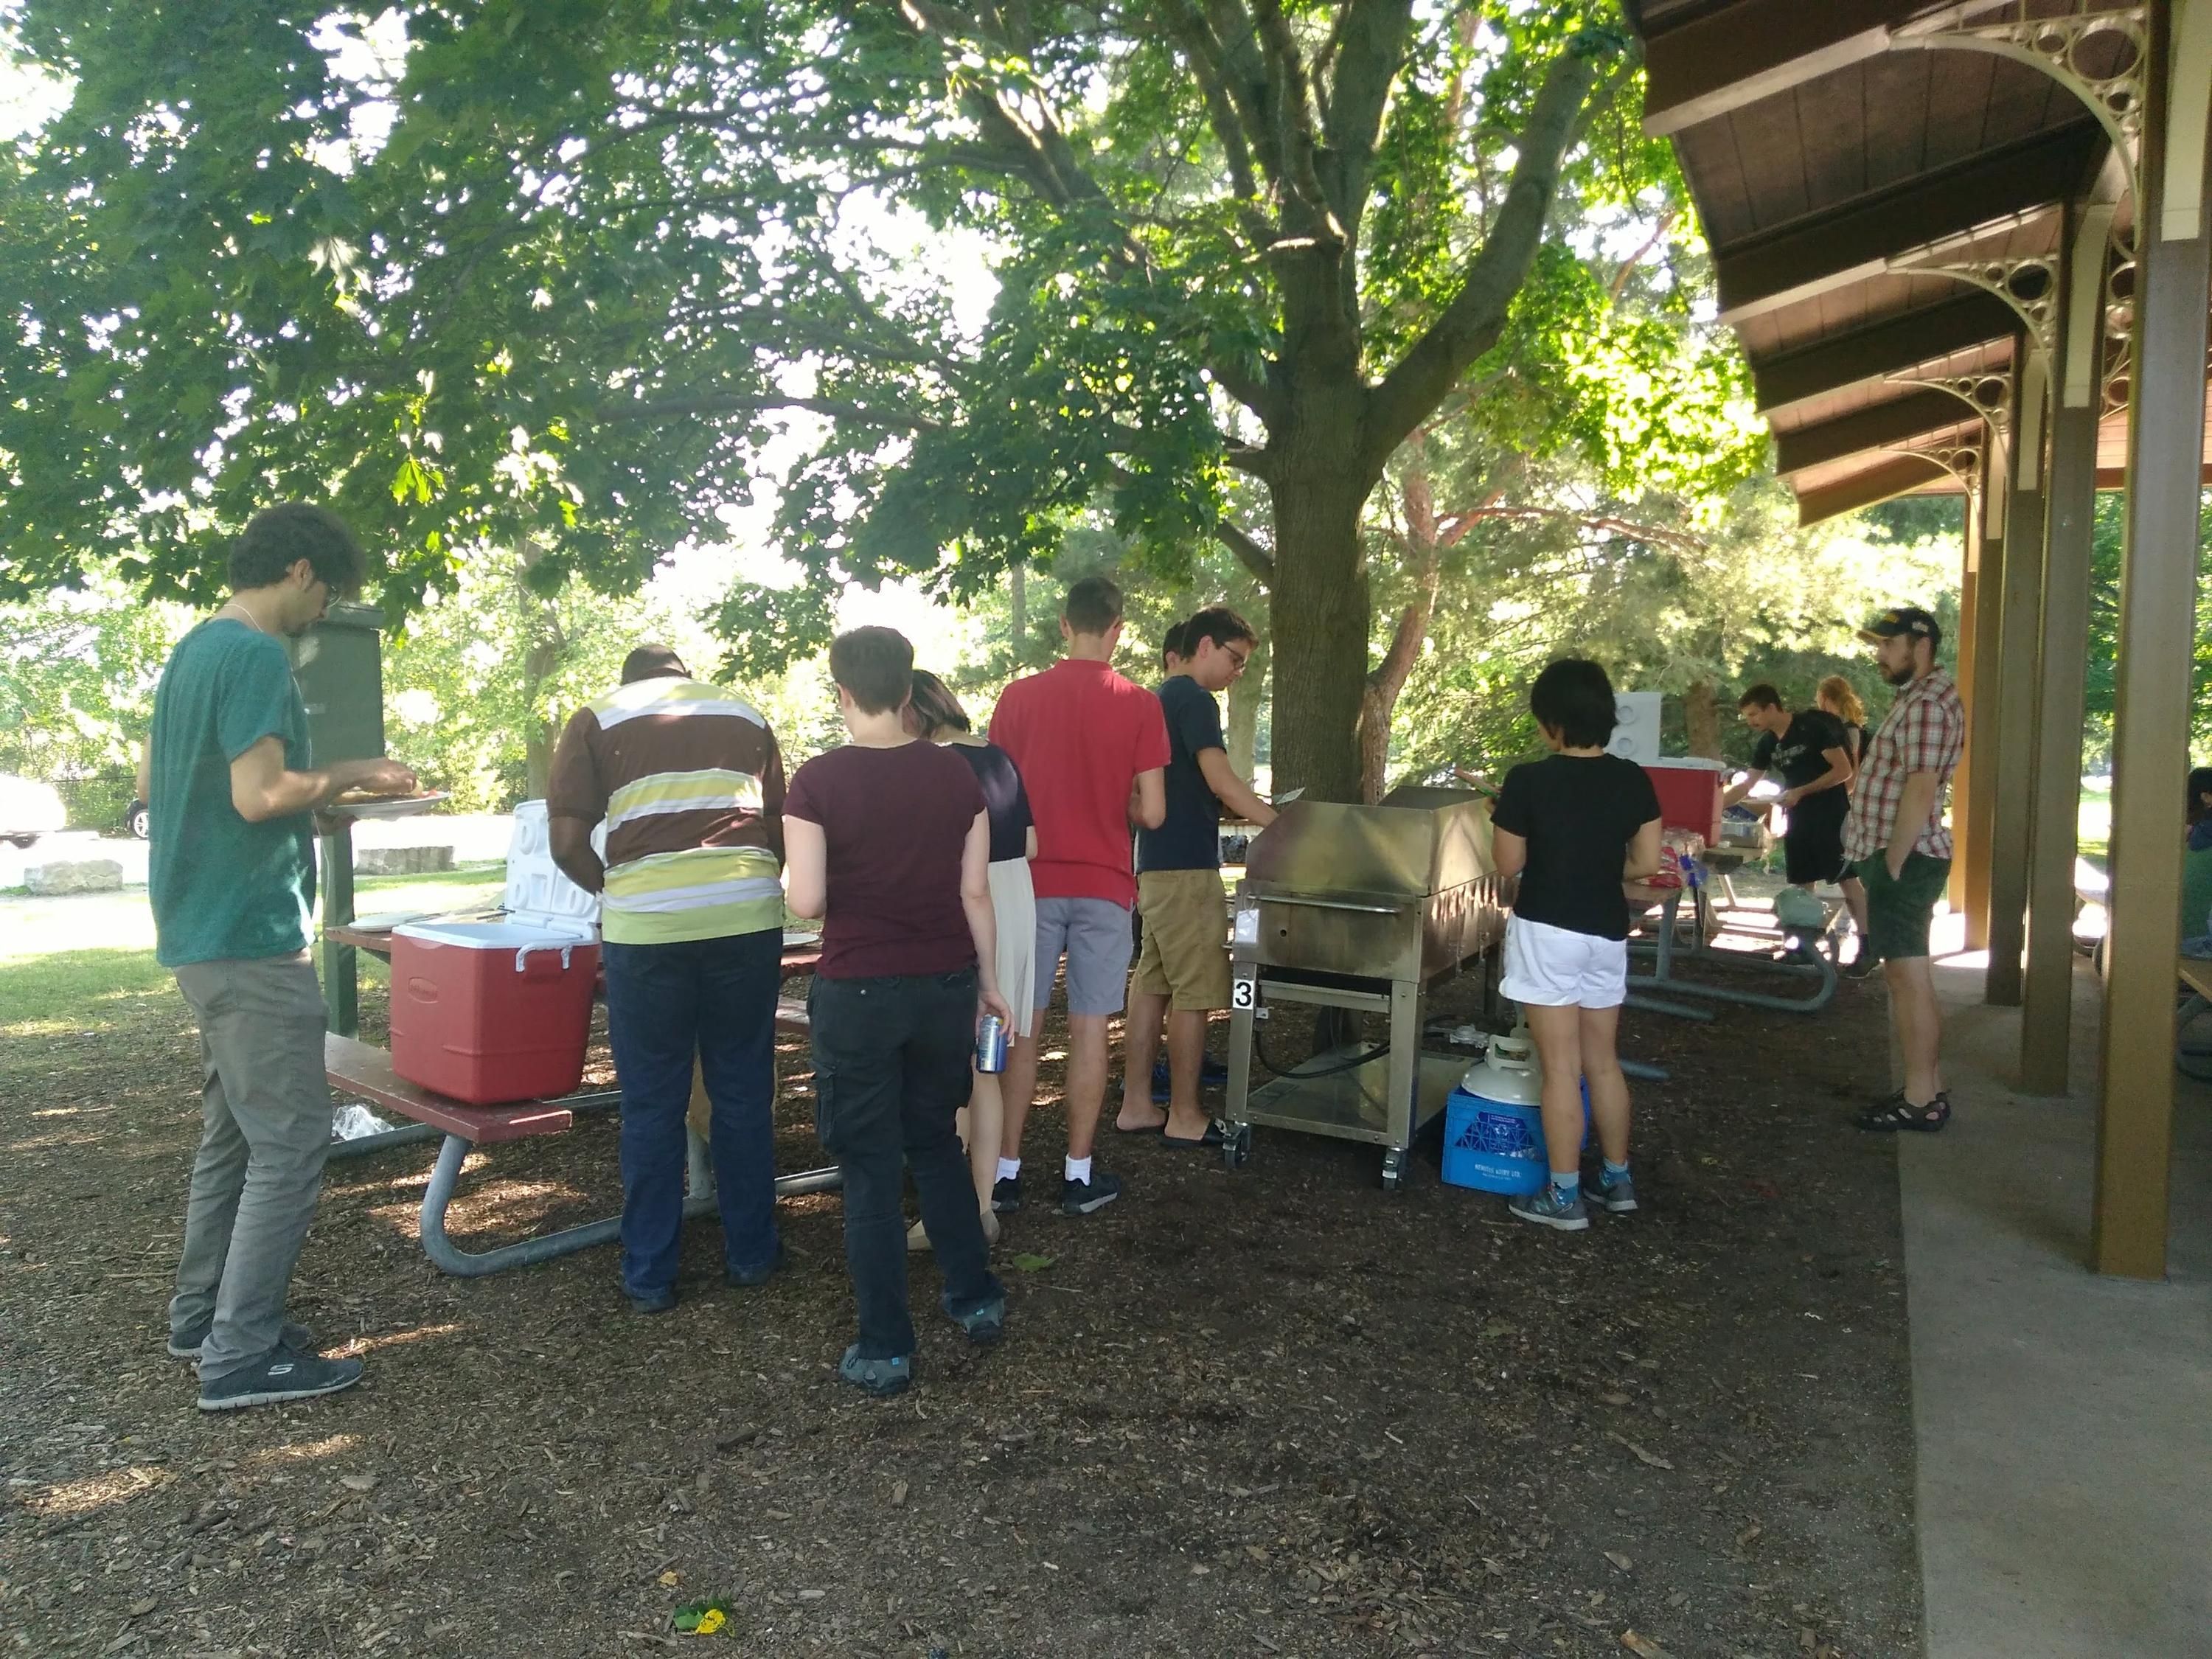 Students lining up for a barbecue